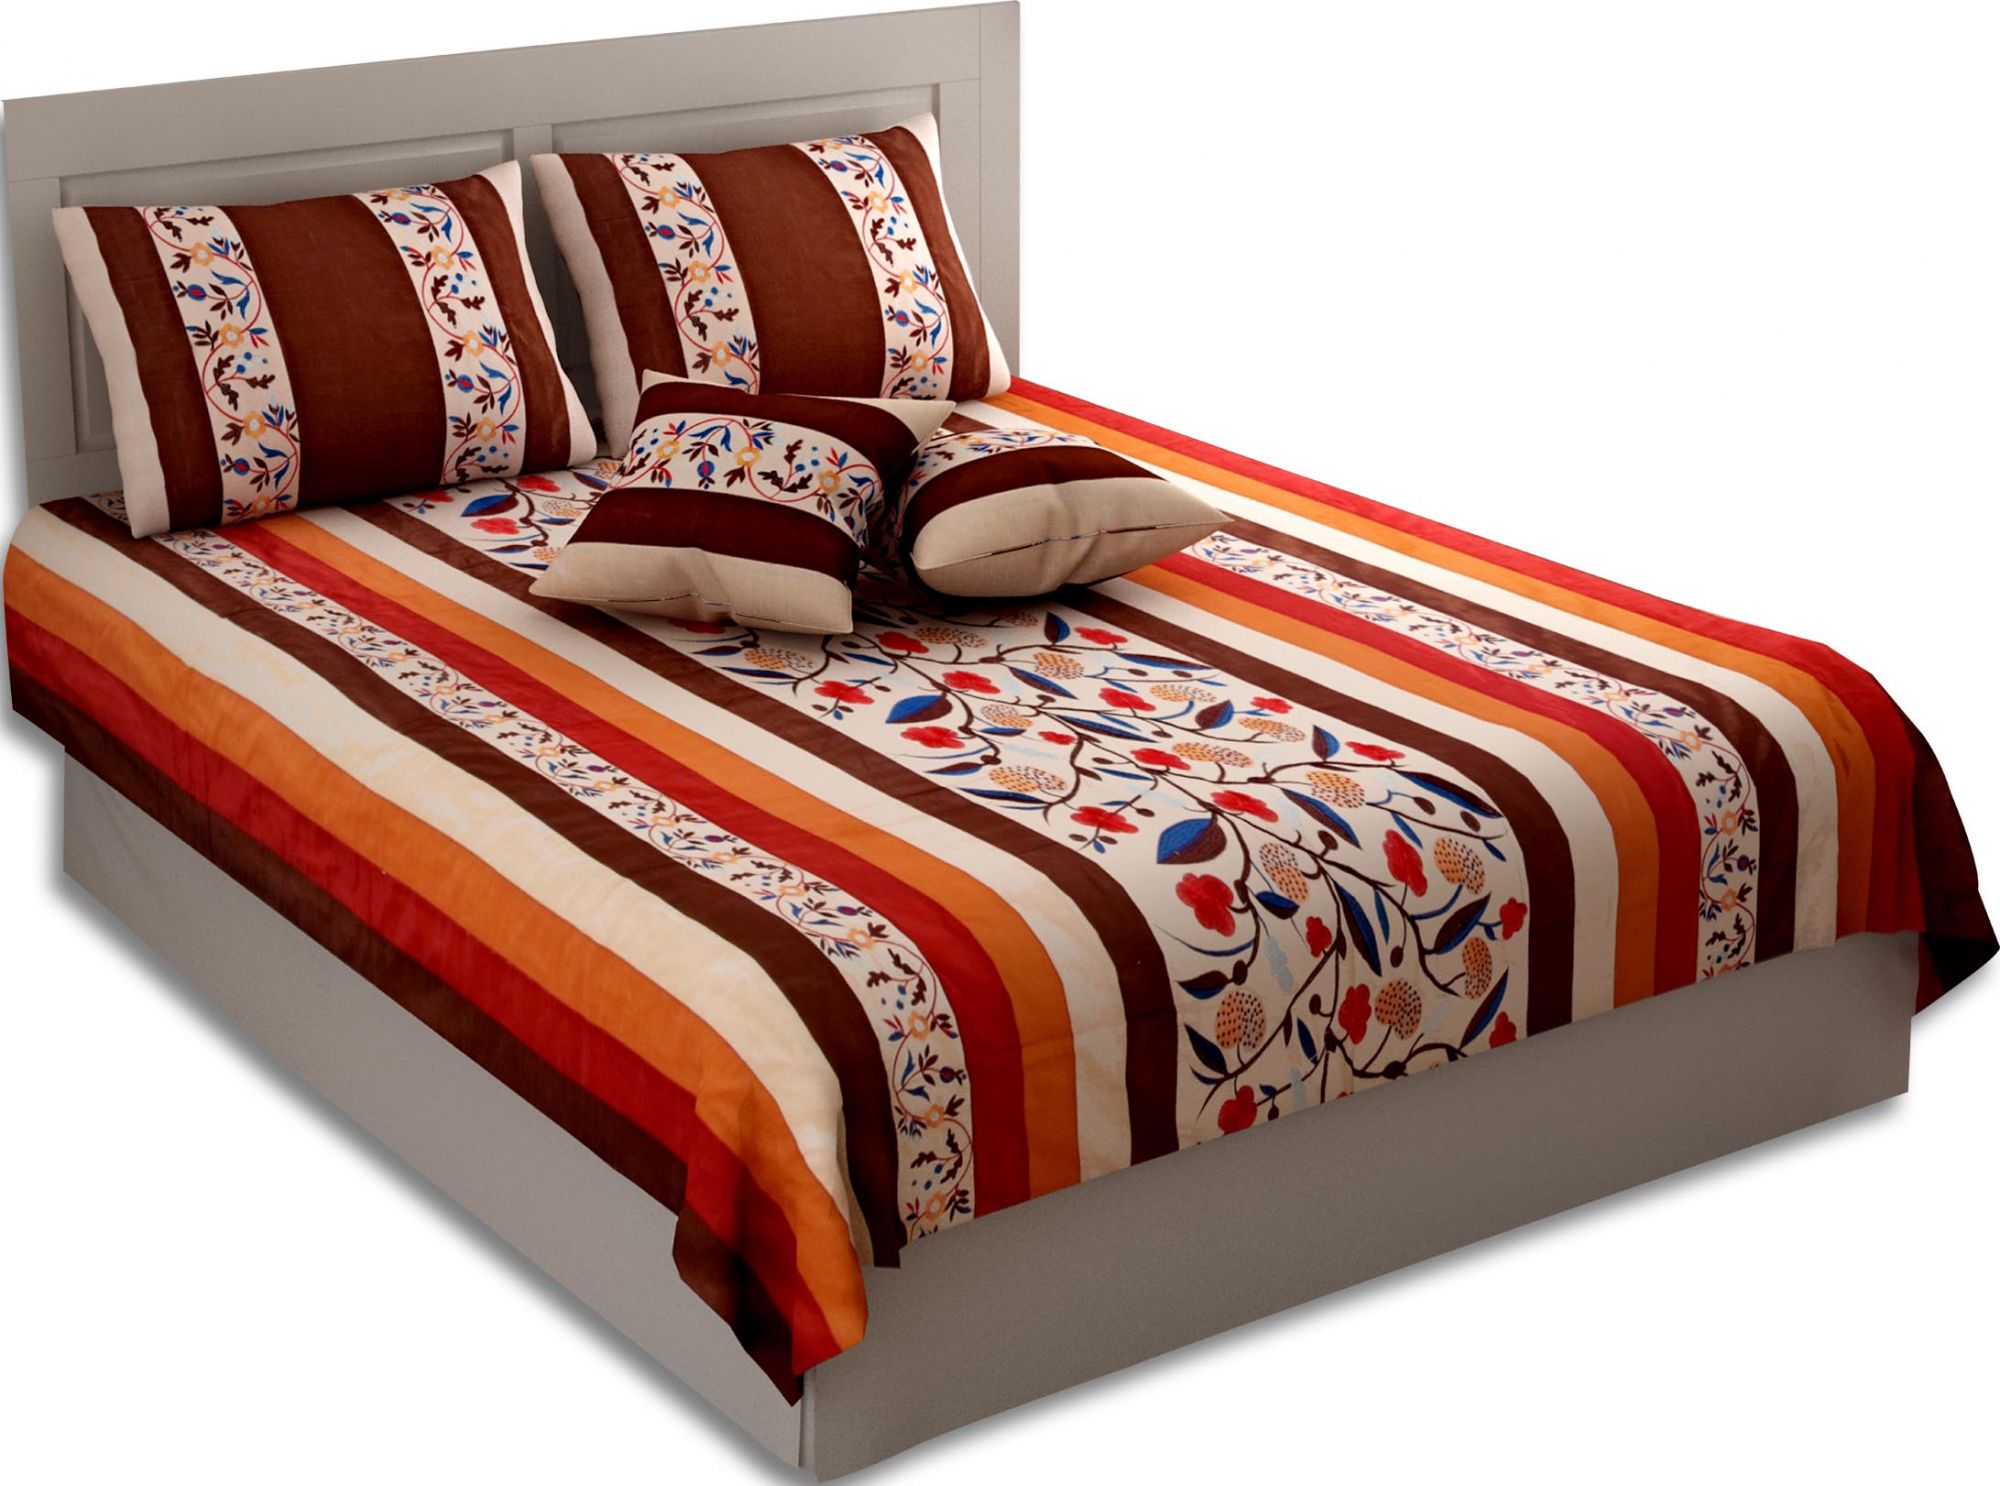 Magnificient Motif Silk Double Bed Cover